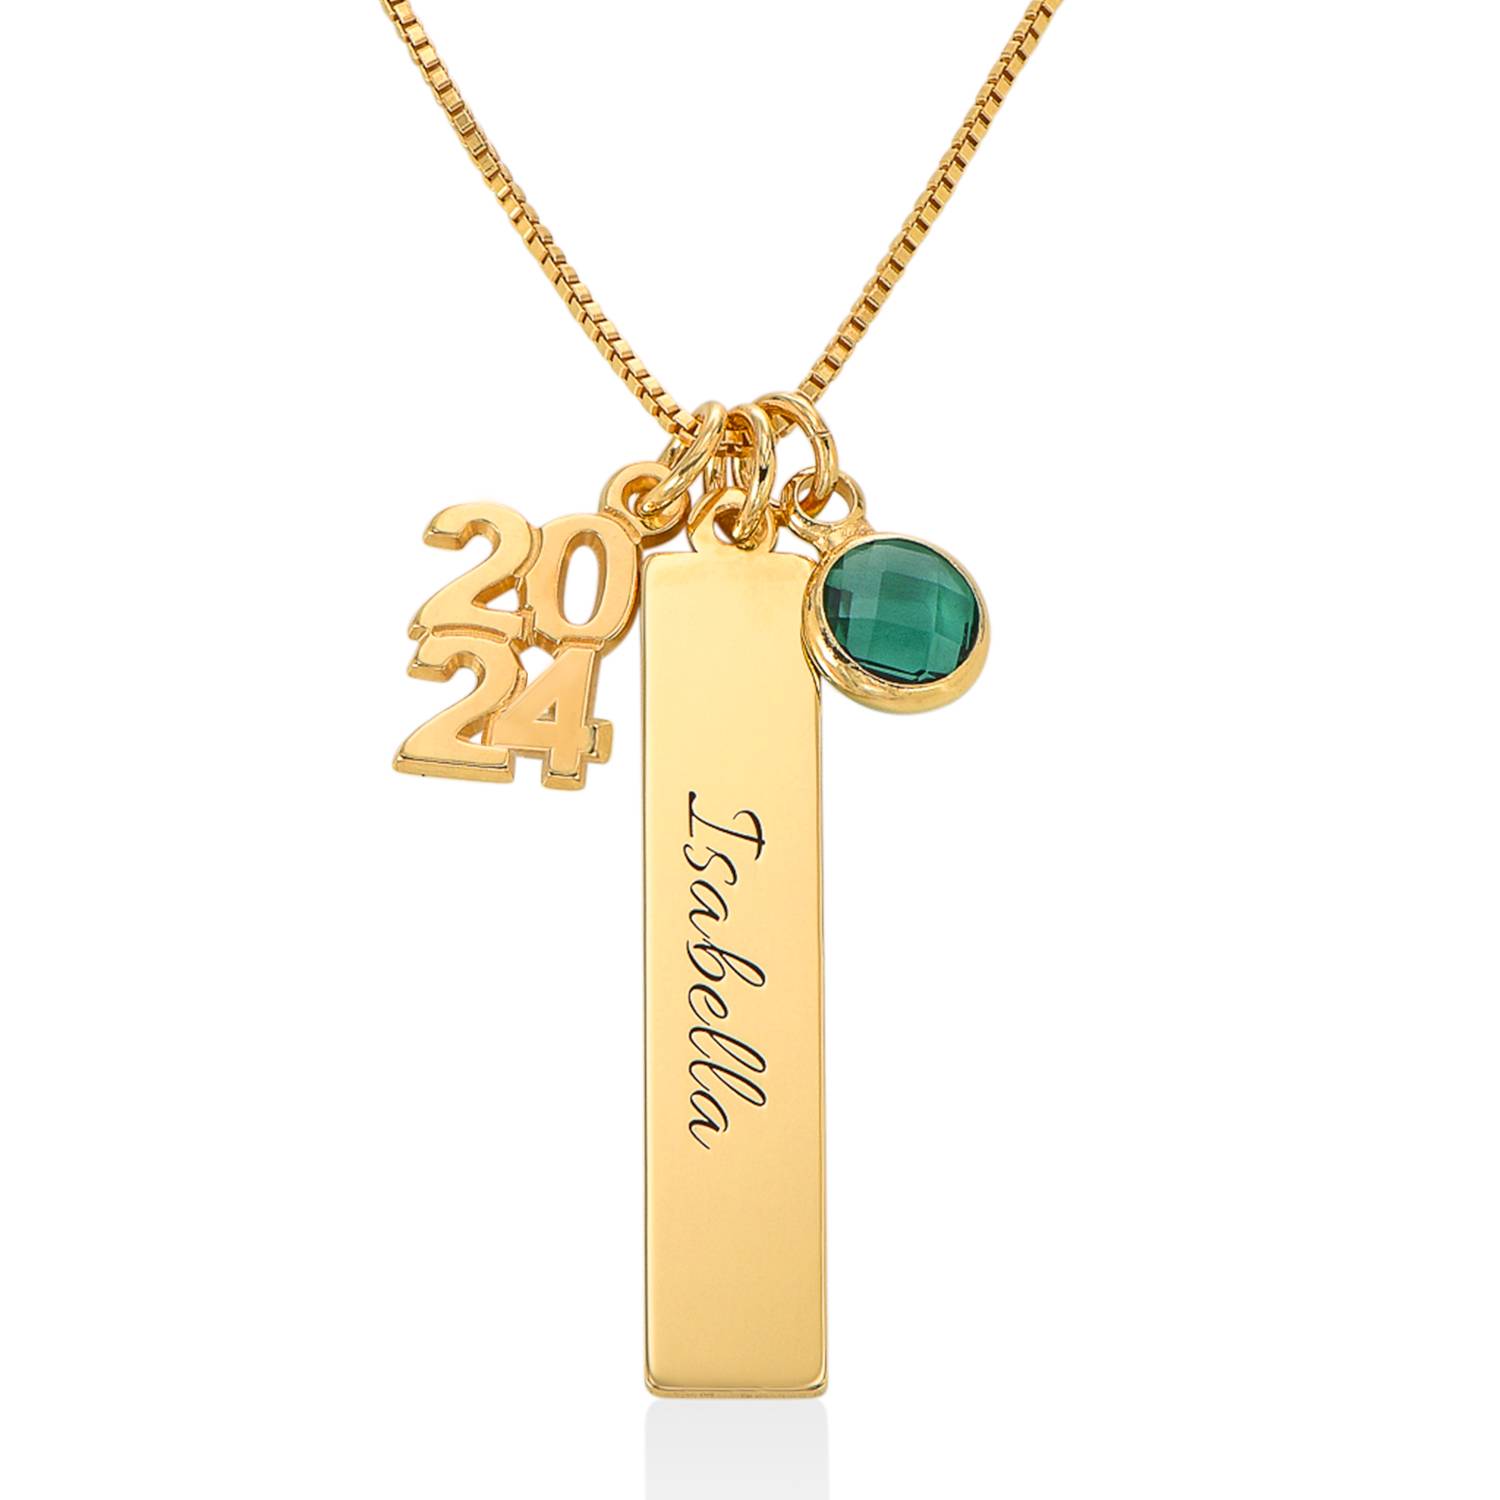 Personalised Charms Graduation Necklace in Gold Vermeil product photo